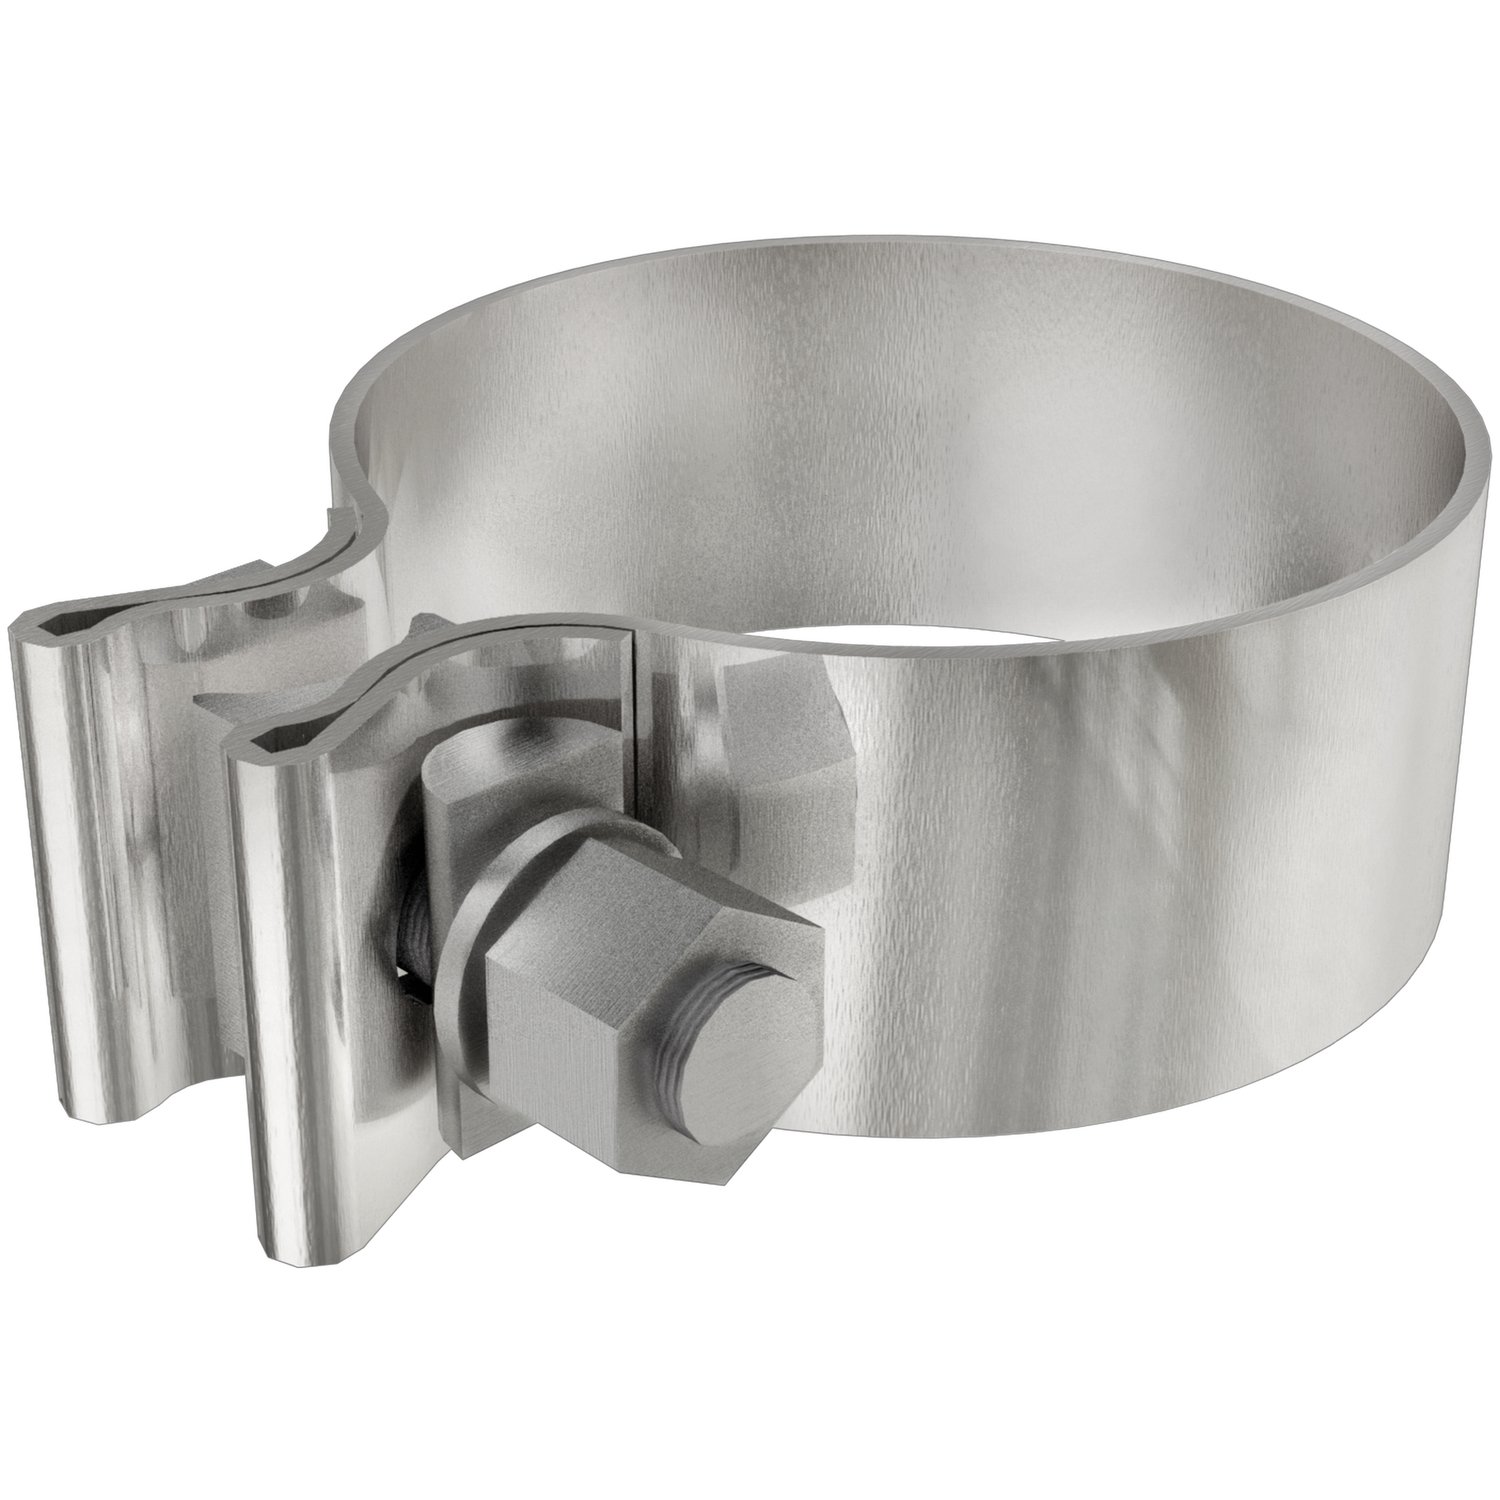 AccuSeal Stainless Steel Exhaust Band Clamps Clamp Diameter: 5"